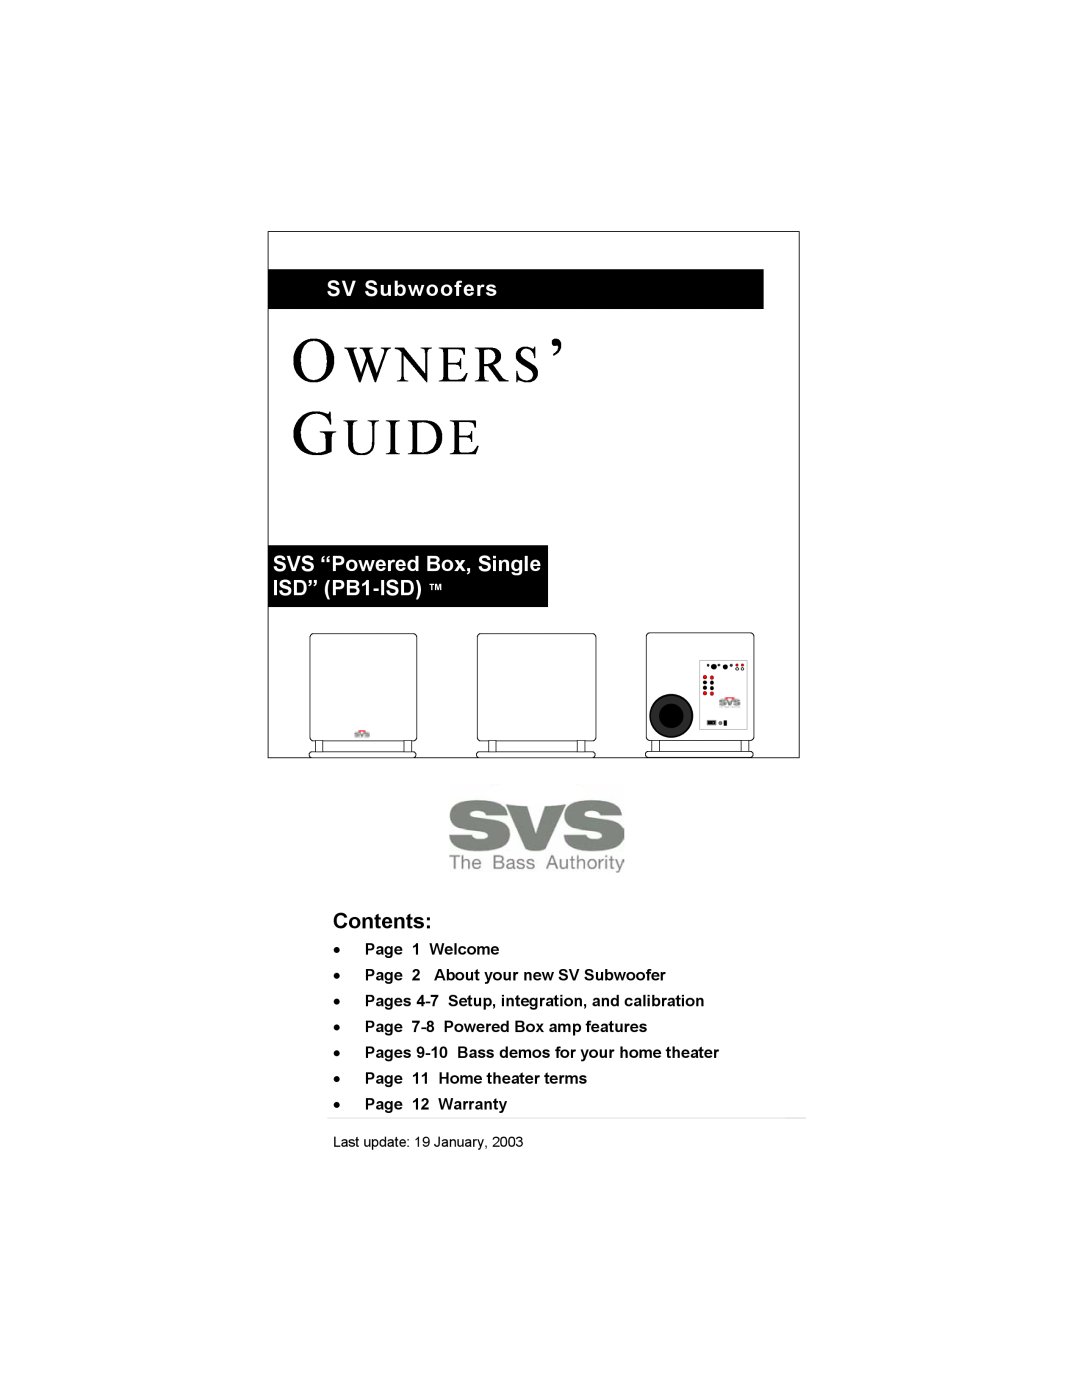 SV Sound warranty Owners’ Guide, SV Subwoofers, SVS “Powered Box, Single ISD” PB1-ISD, Contents, Page 1 Welcome 